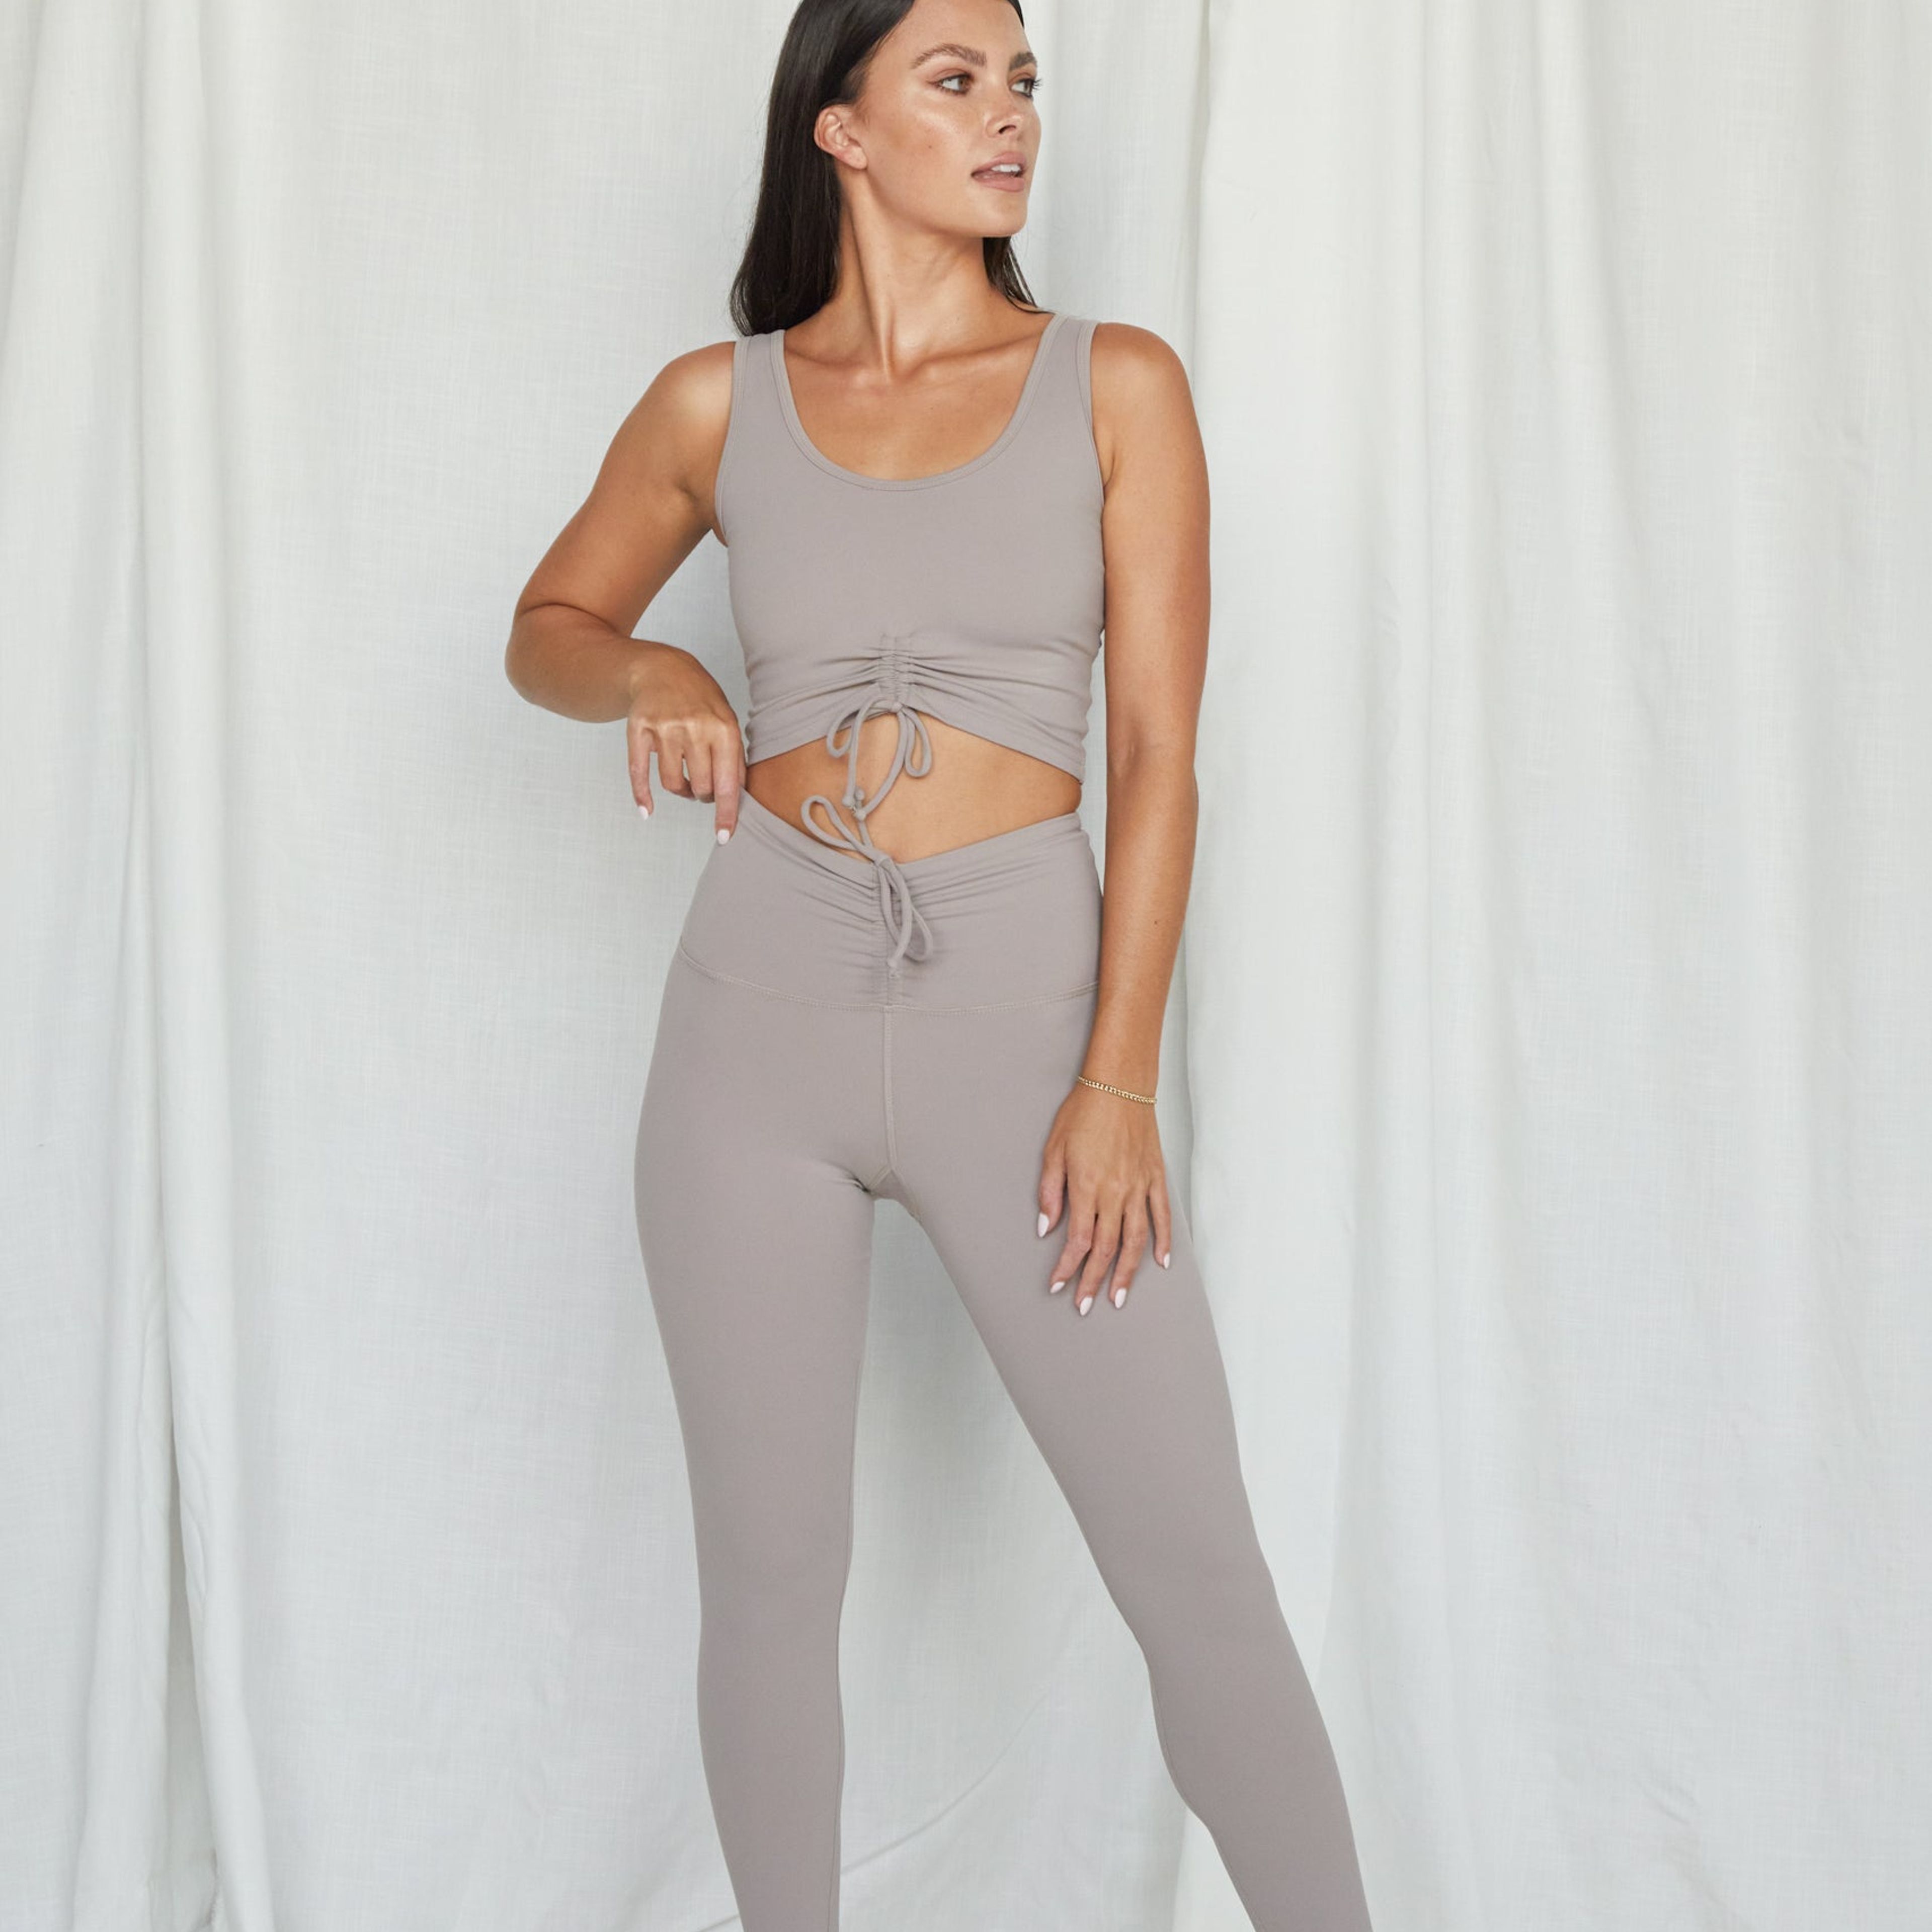 www.strut-this.com/products/the-lovers-ankle-legging